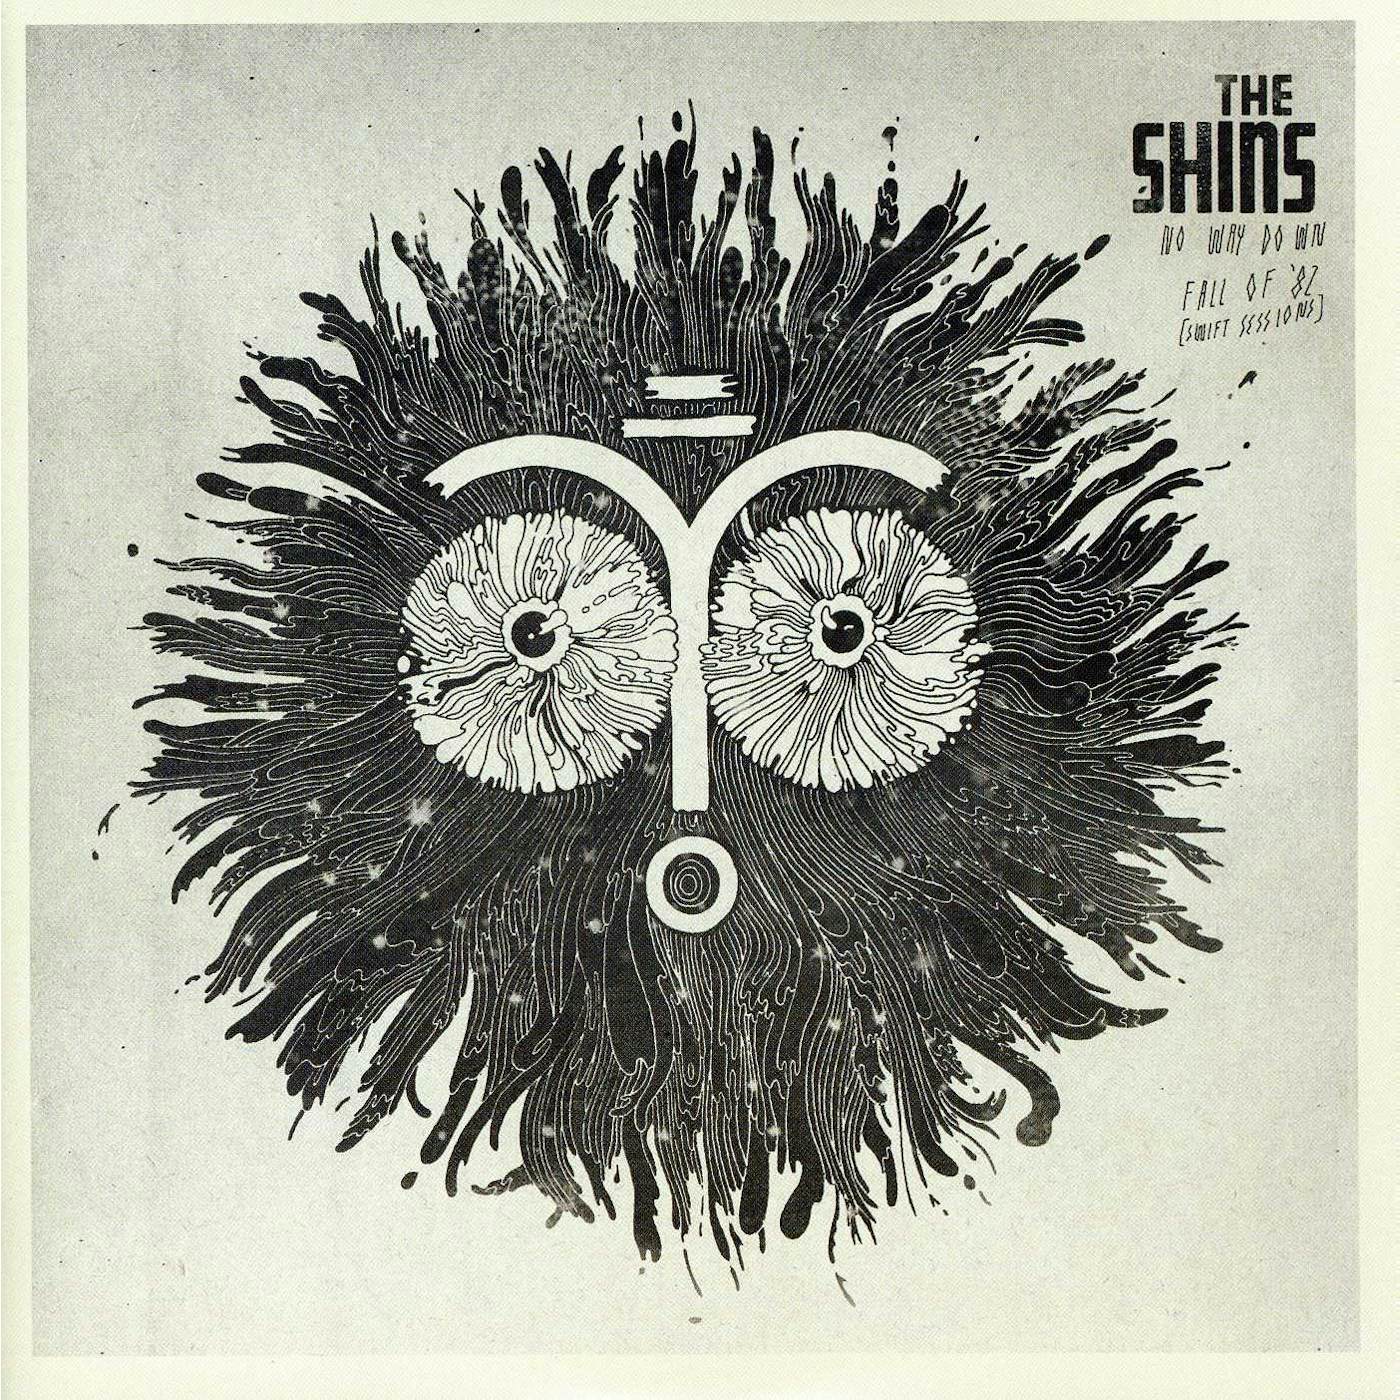 The Shins NO WAY DOWN / FALL OF 82 (SWIFT SESSIONS) Vinyl Record